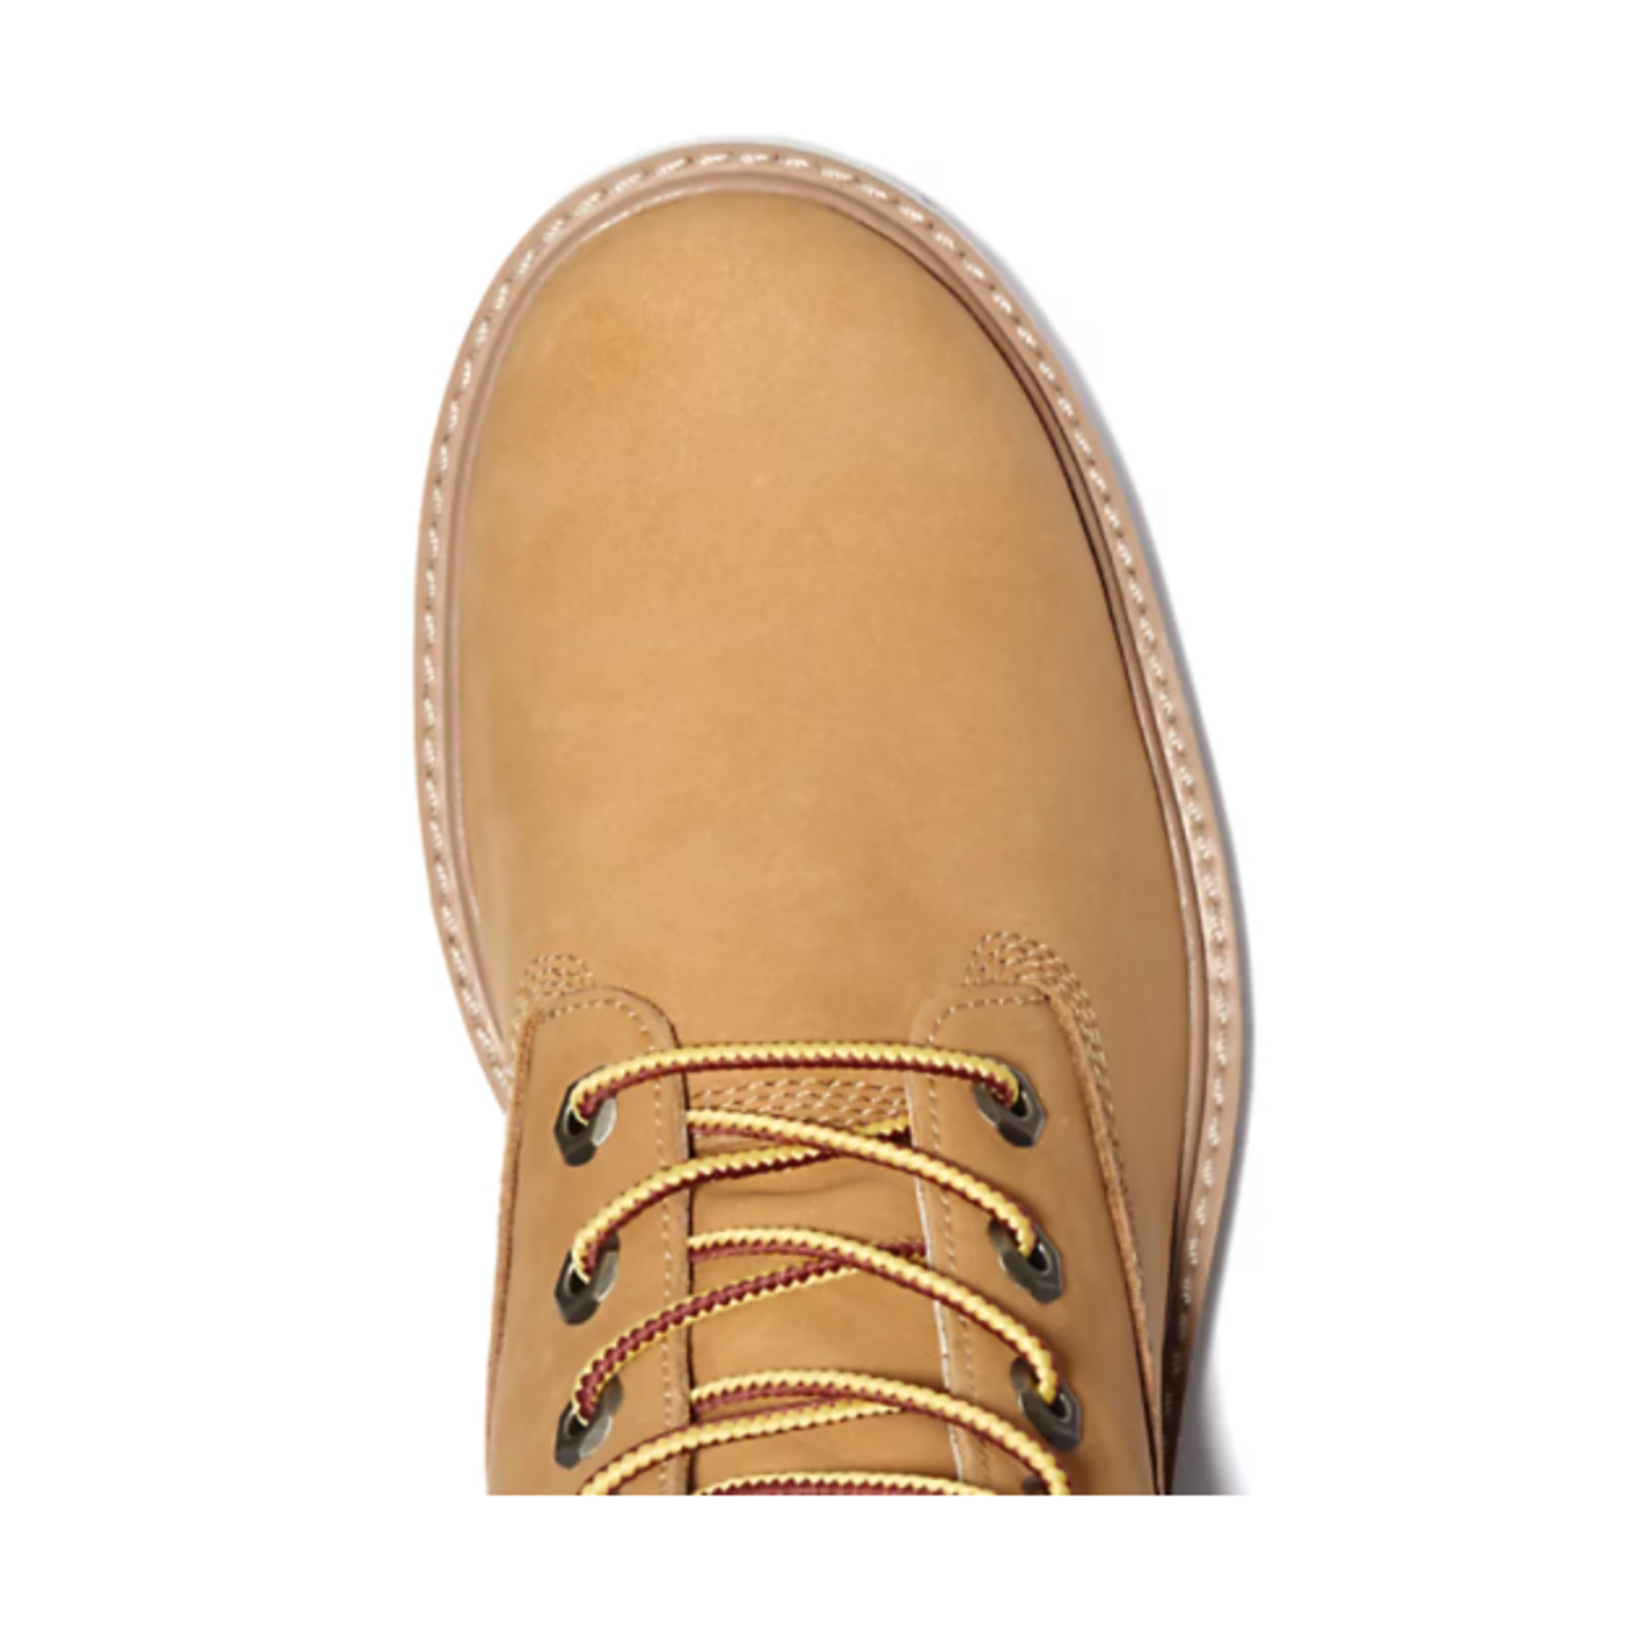 Timberland LUCIA WAY 6 INCH BOOT FOR WOMEN IN YELLOW